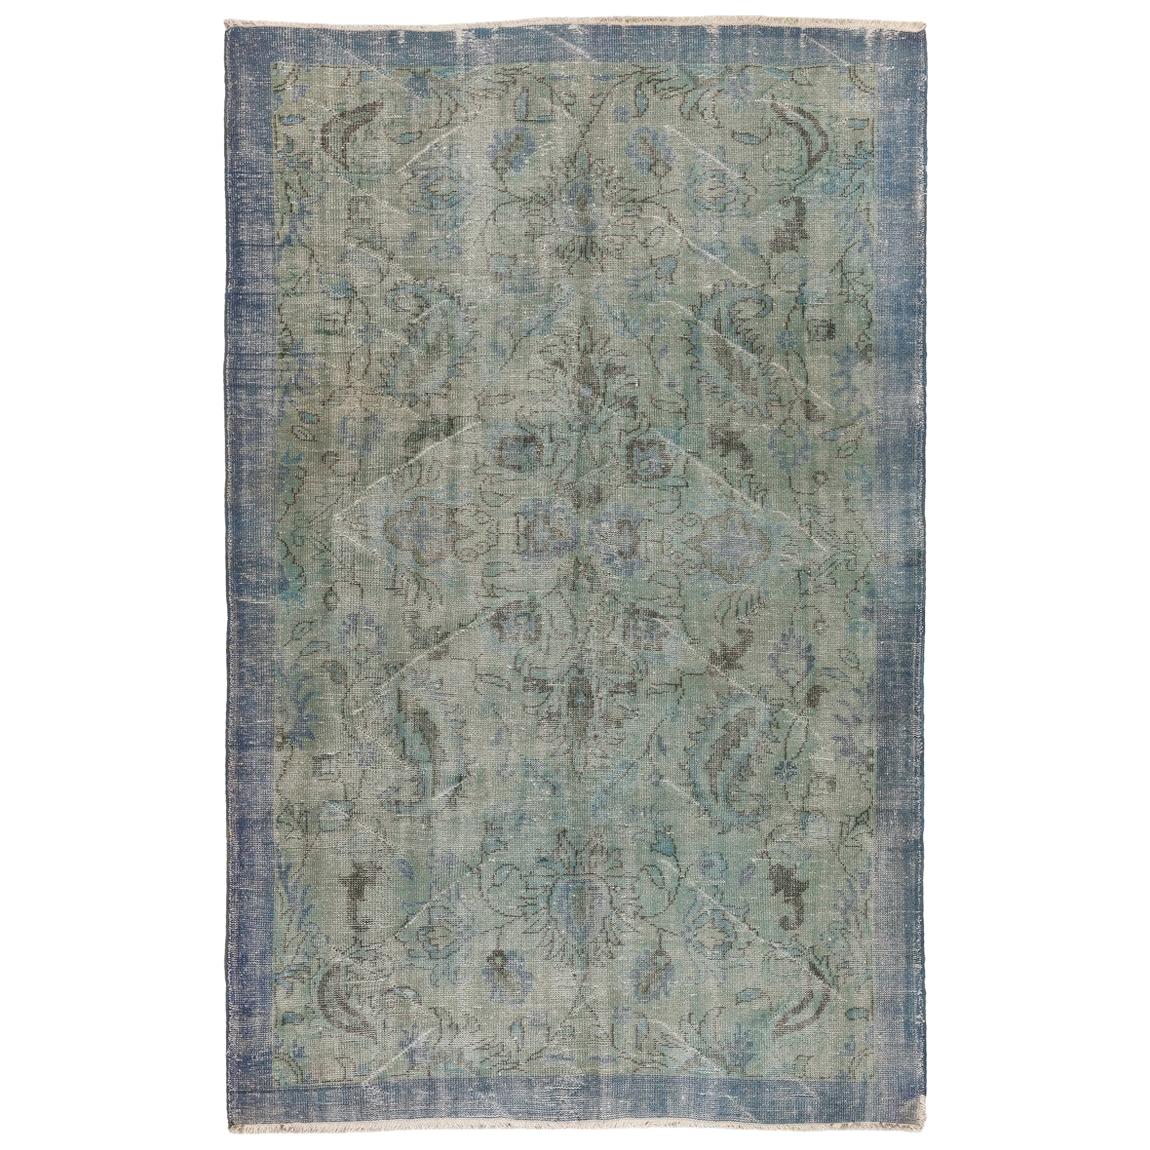 6x9.5 Ft Distressed Vintage Floral Anatolian Area Rug Over-Dyed in Blue Color